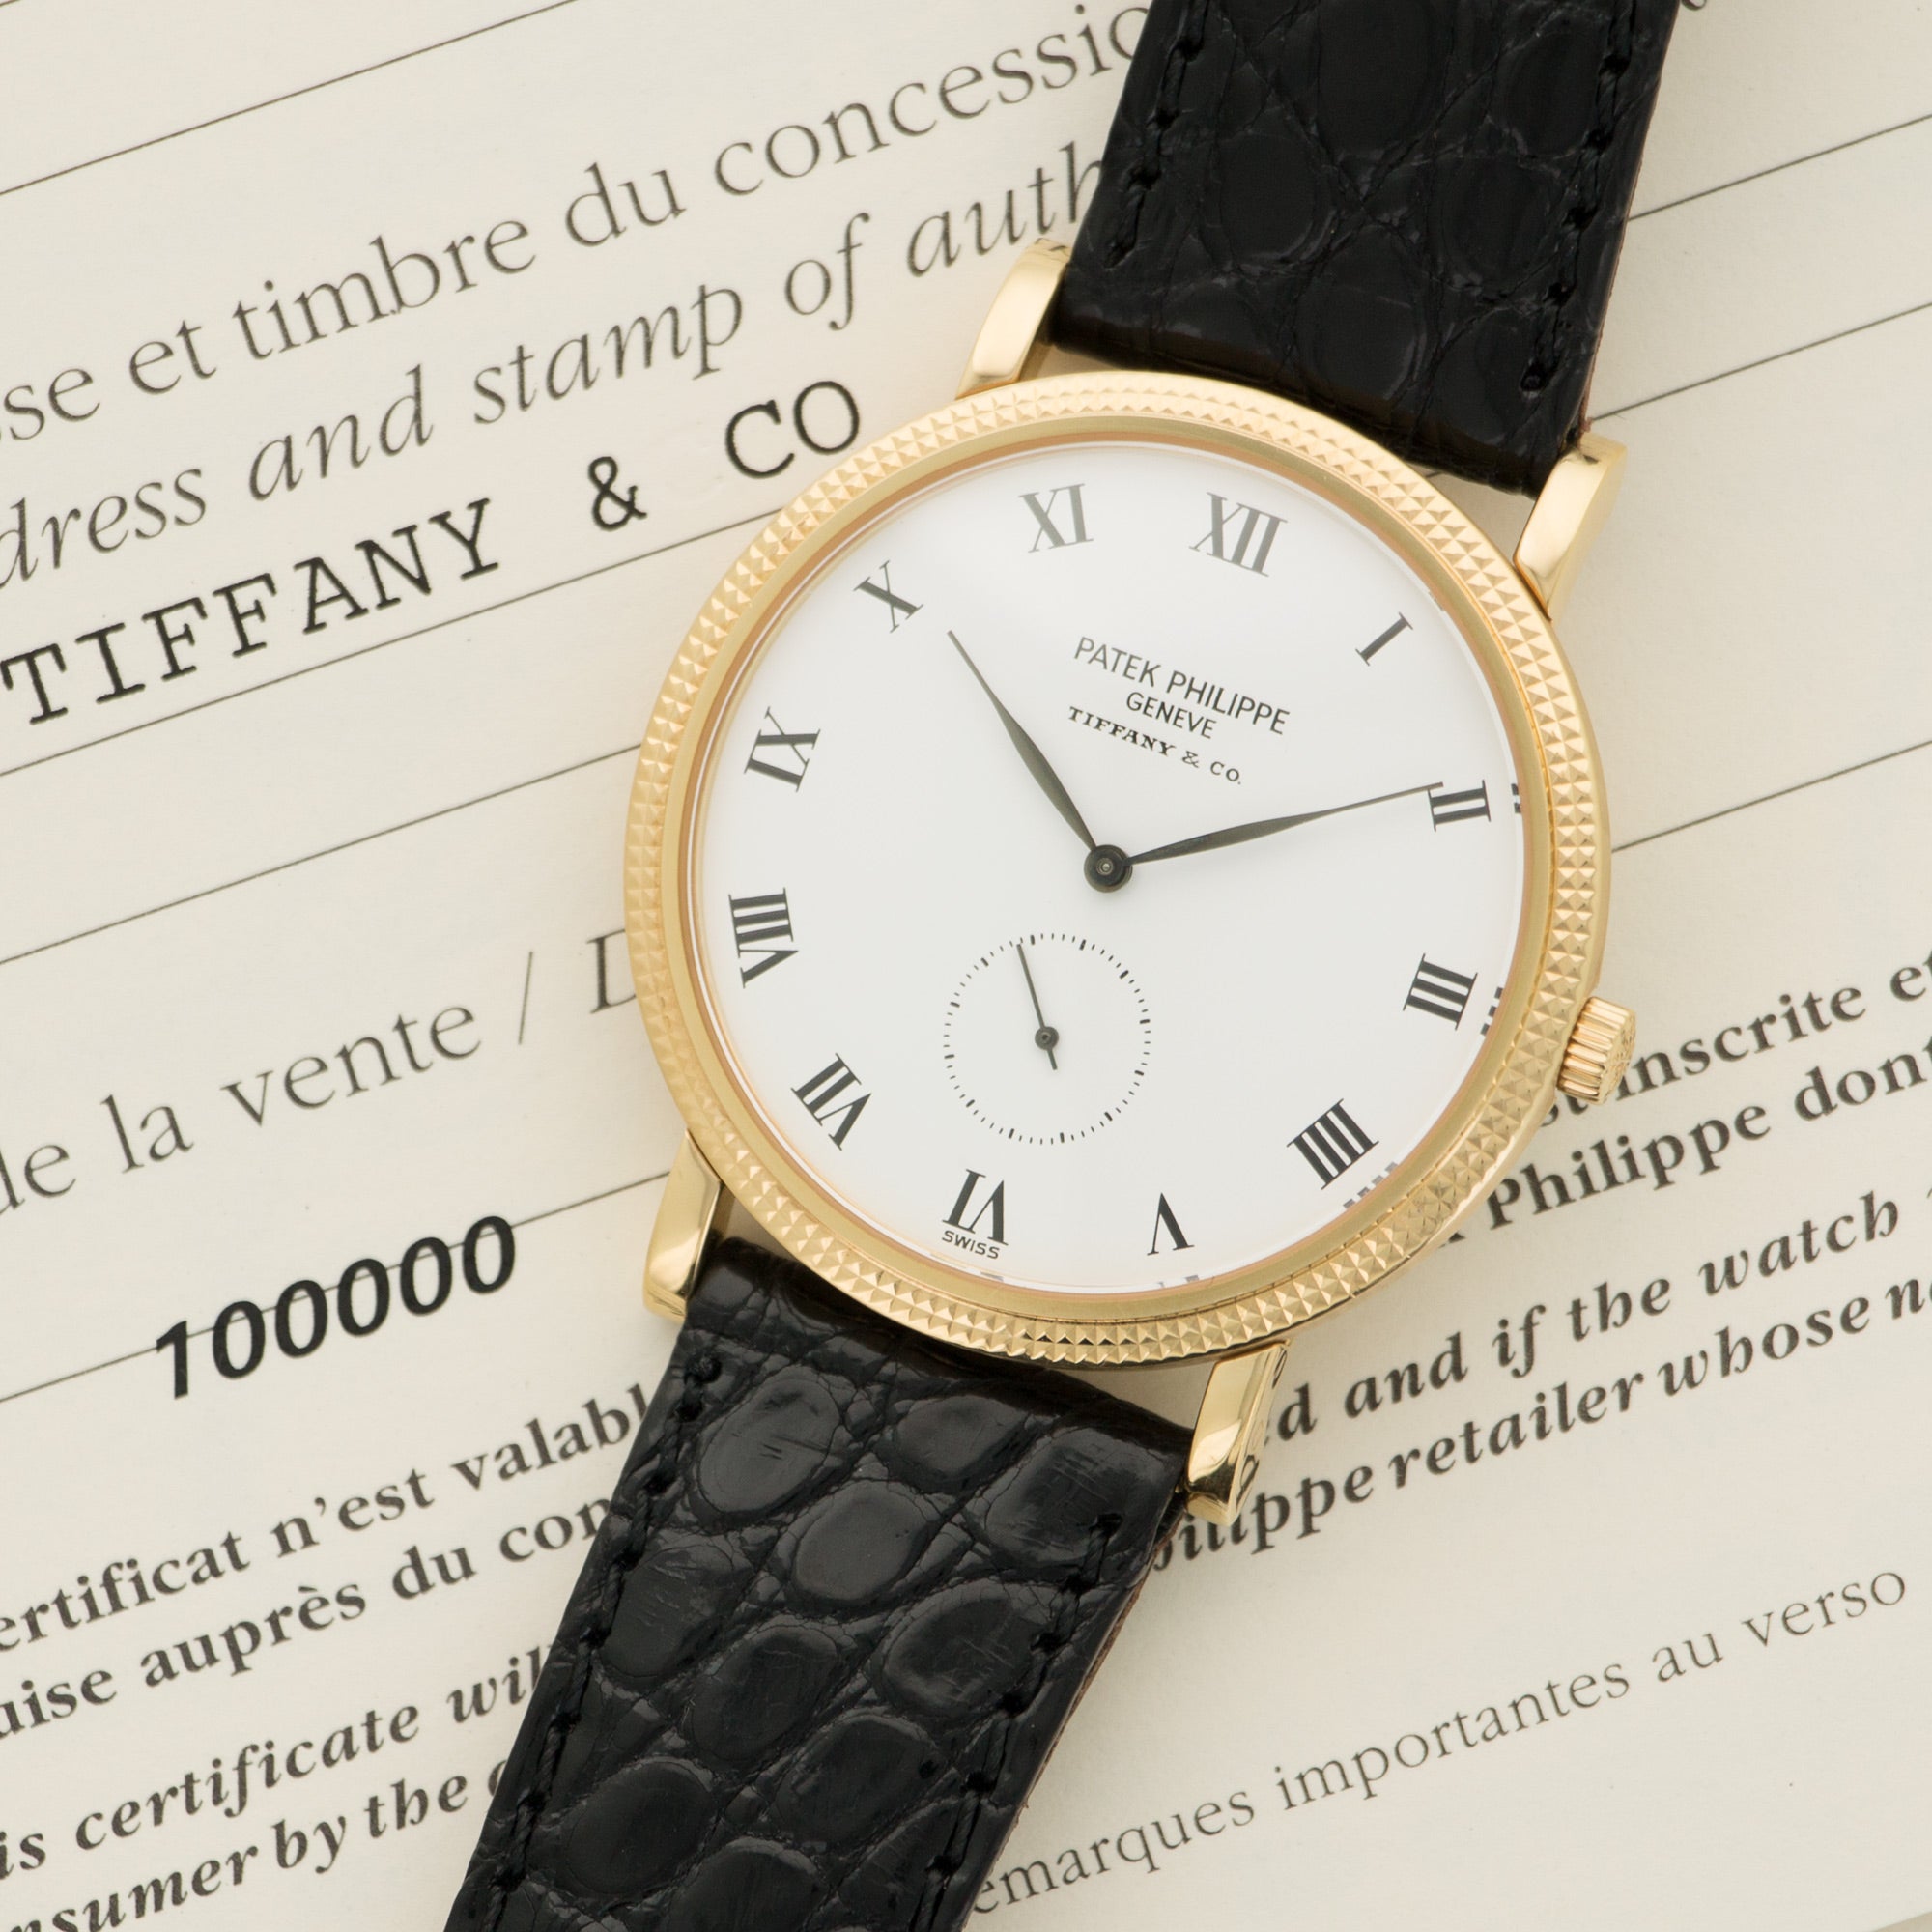 PATEK PHILIPPE, CALATRAVA DOUBLE-SIGNED TIFFANY & CO, REF 3802/205J,  YELLOW GOLD BRACELET WATCH WITH DATE AND RETAILER SIGNATURE, CIRCA 2000, Important Watches, 2020